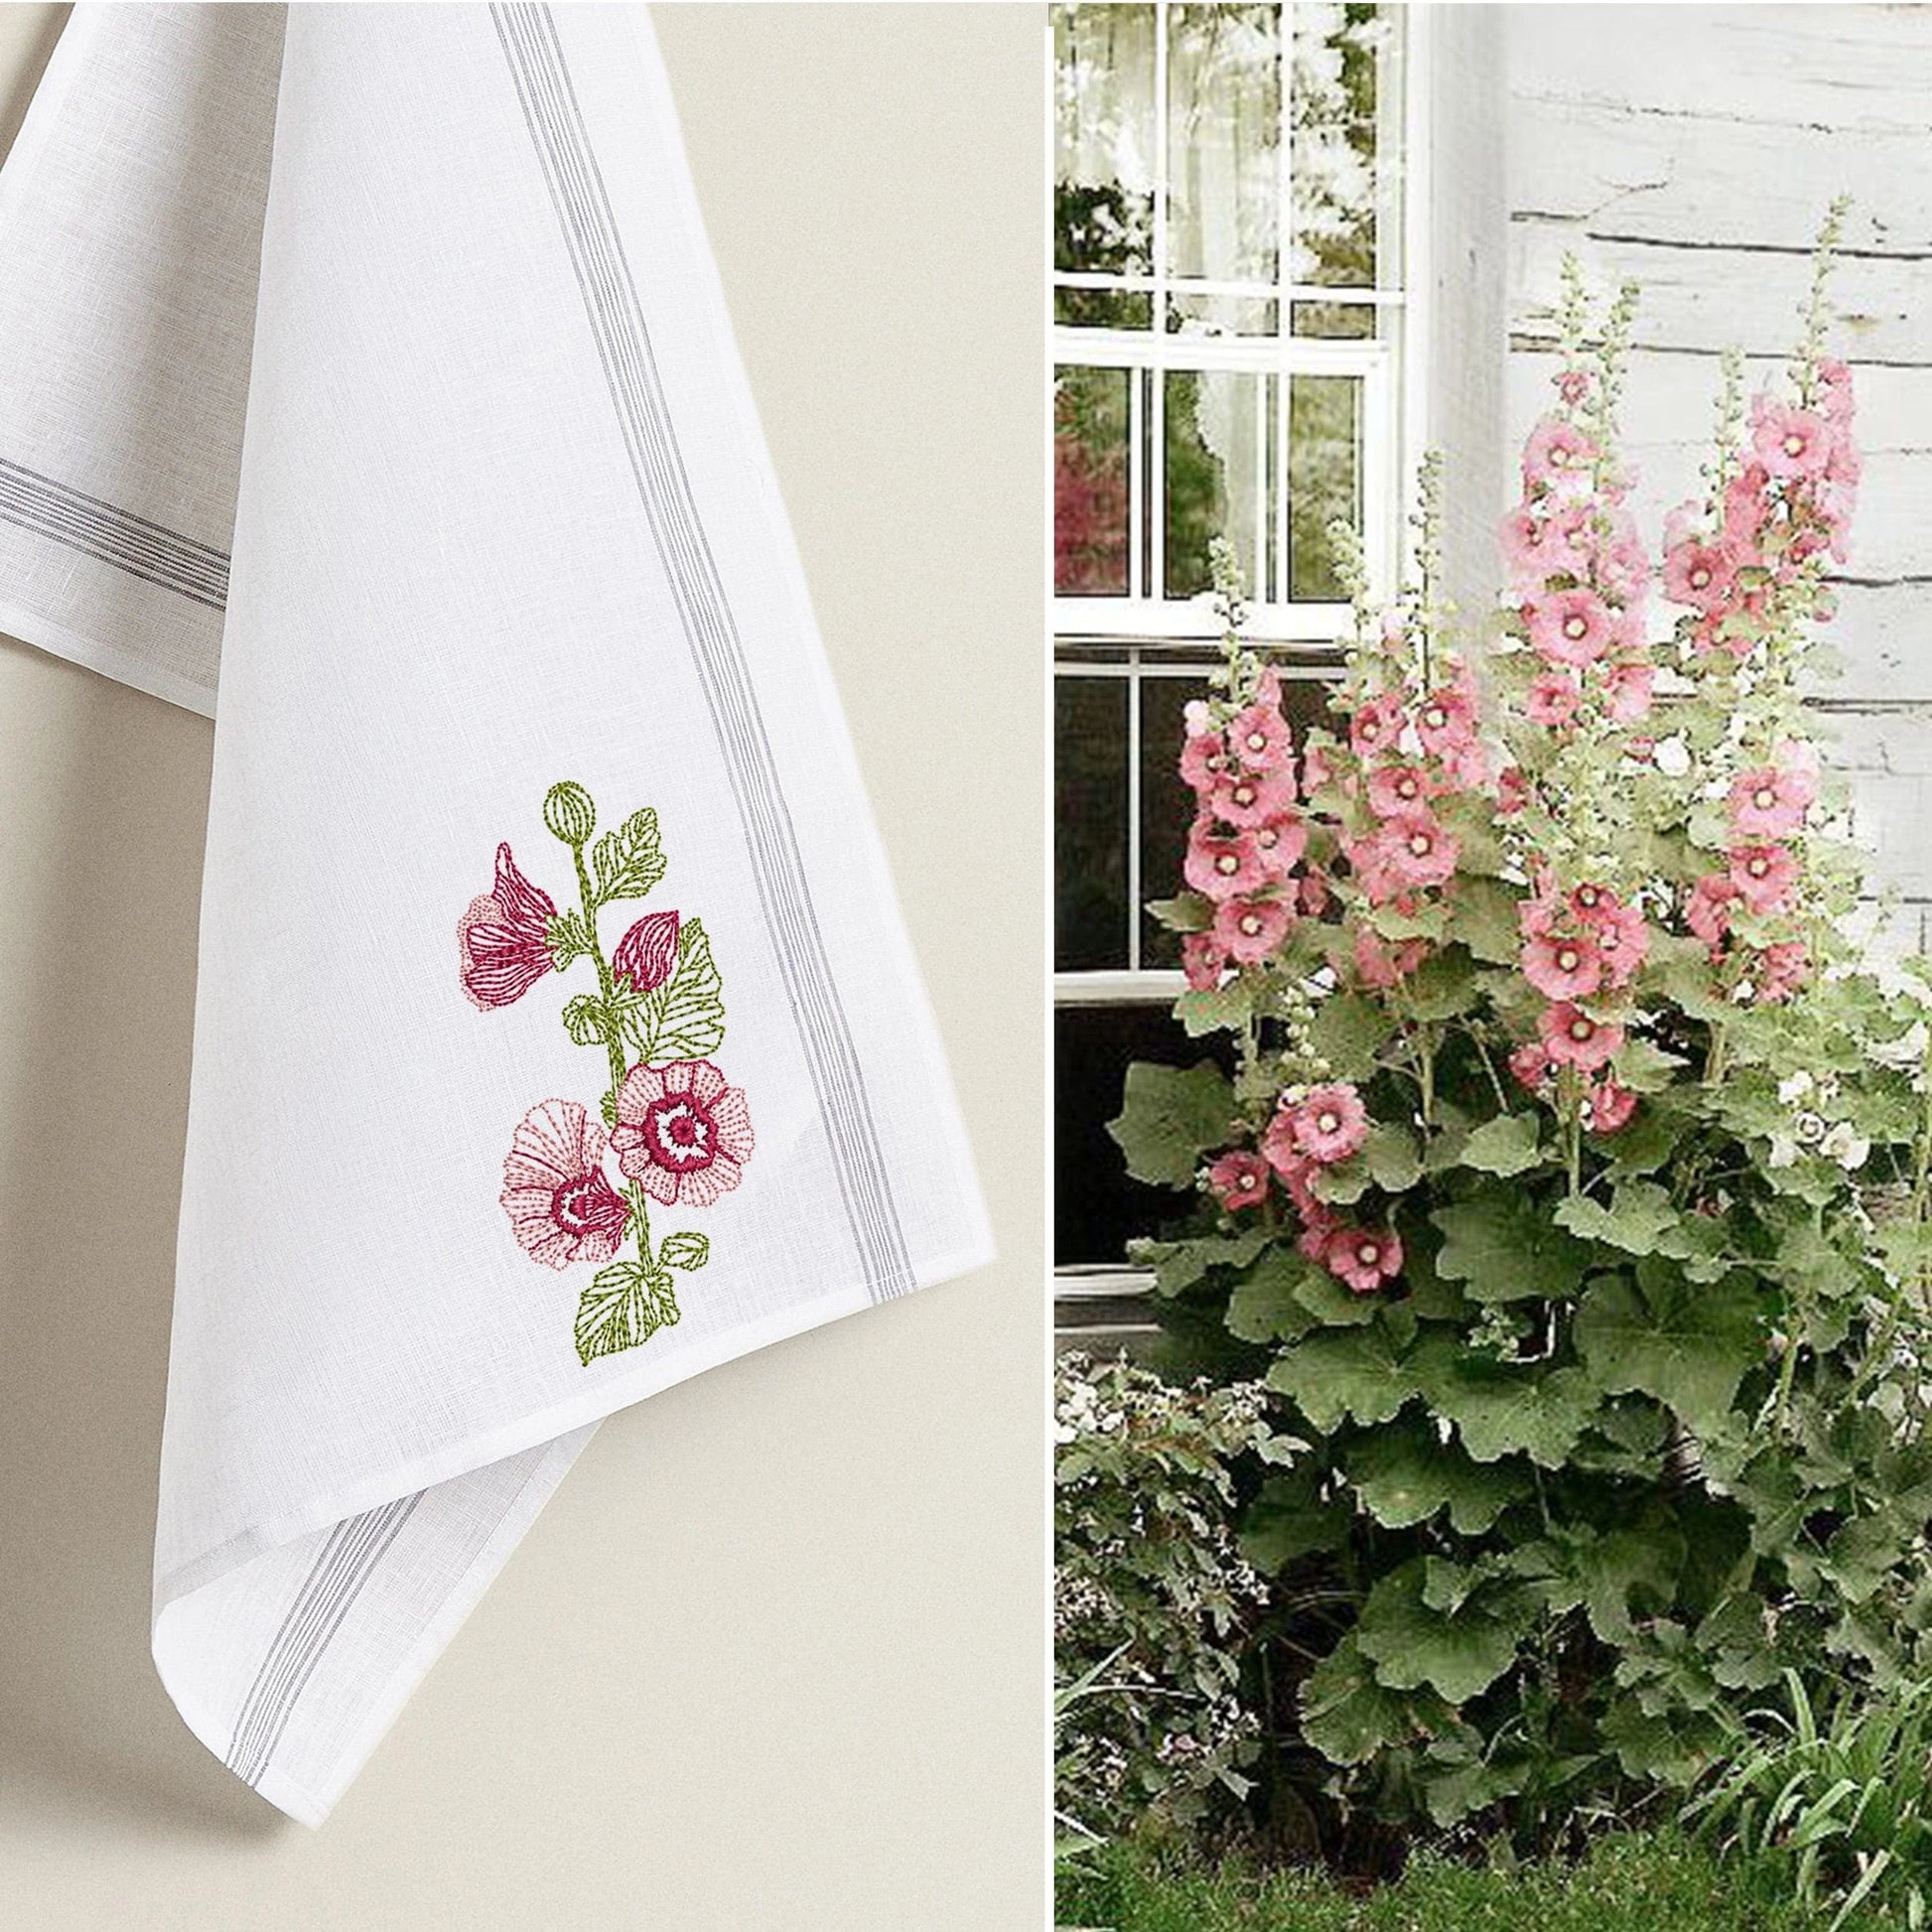 Alcea Flower Machine Embroidery Design on country house style towel